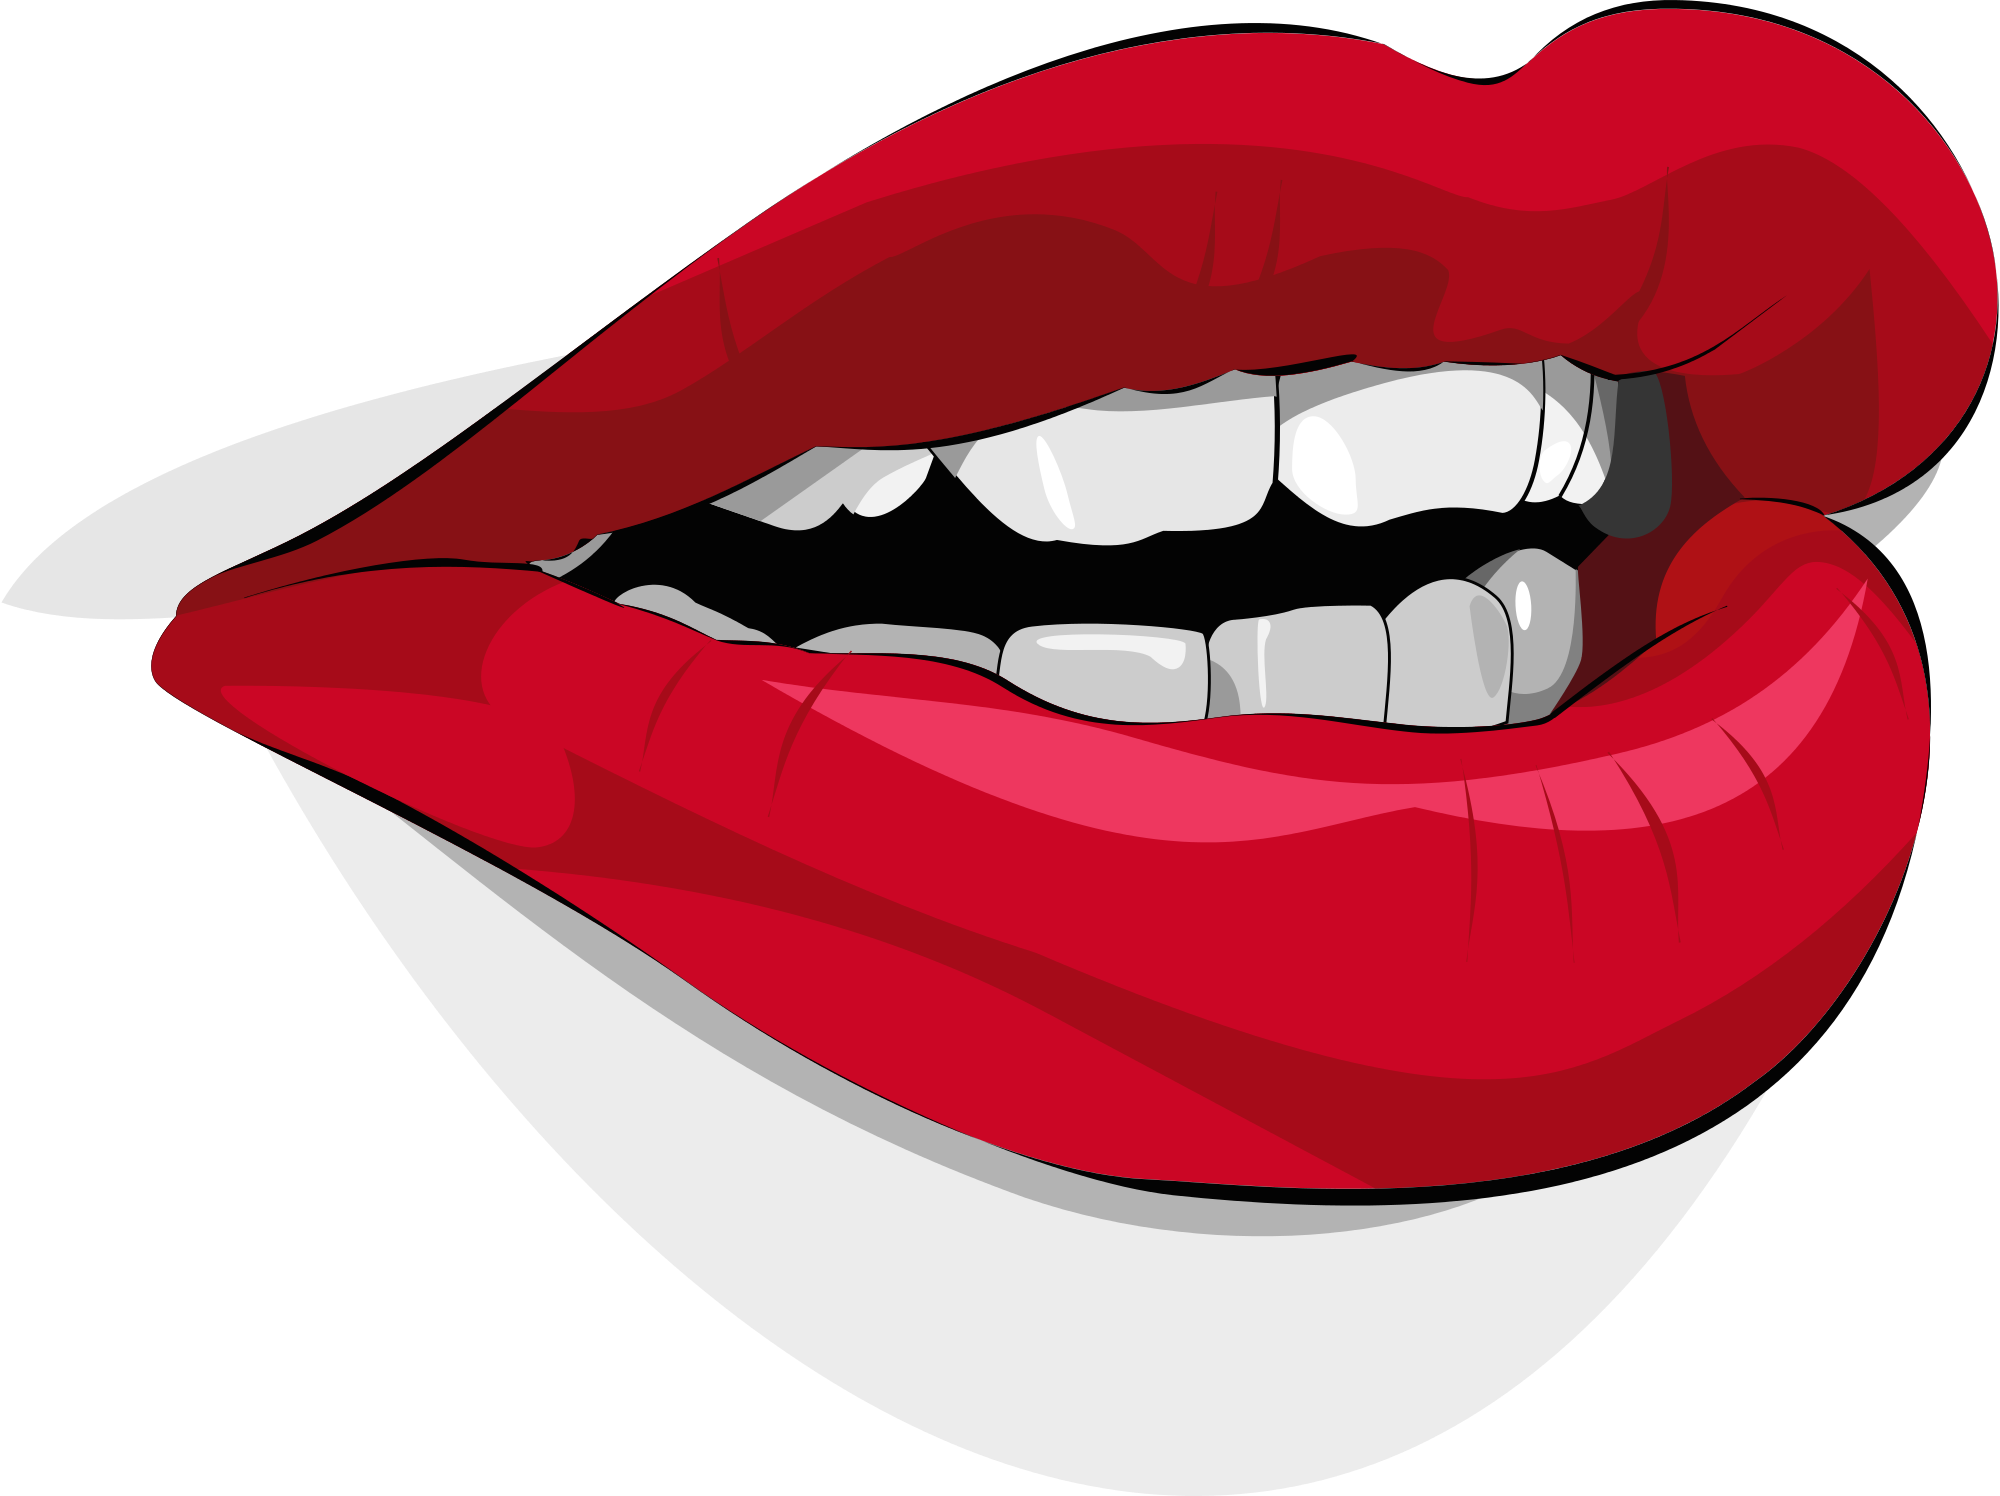 Mouth Talking PNG HD Transparent Mouth Talking HD.PNG Images.